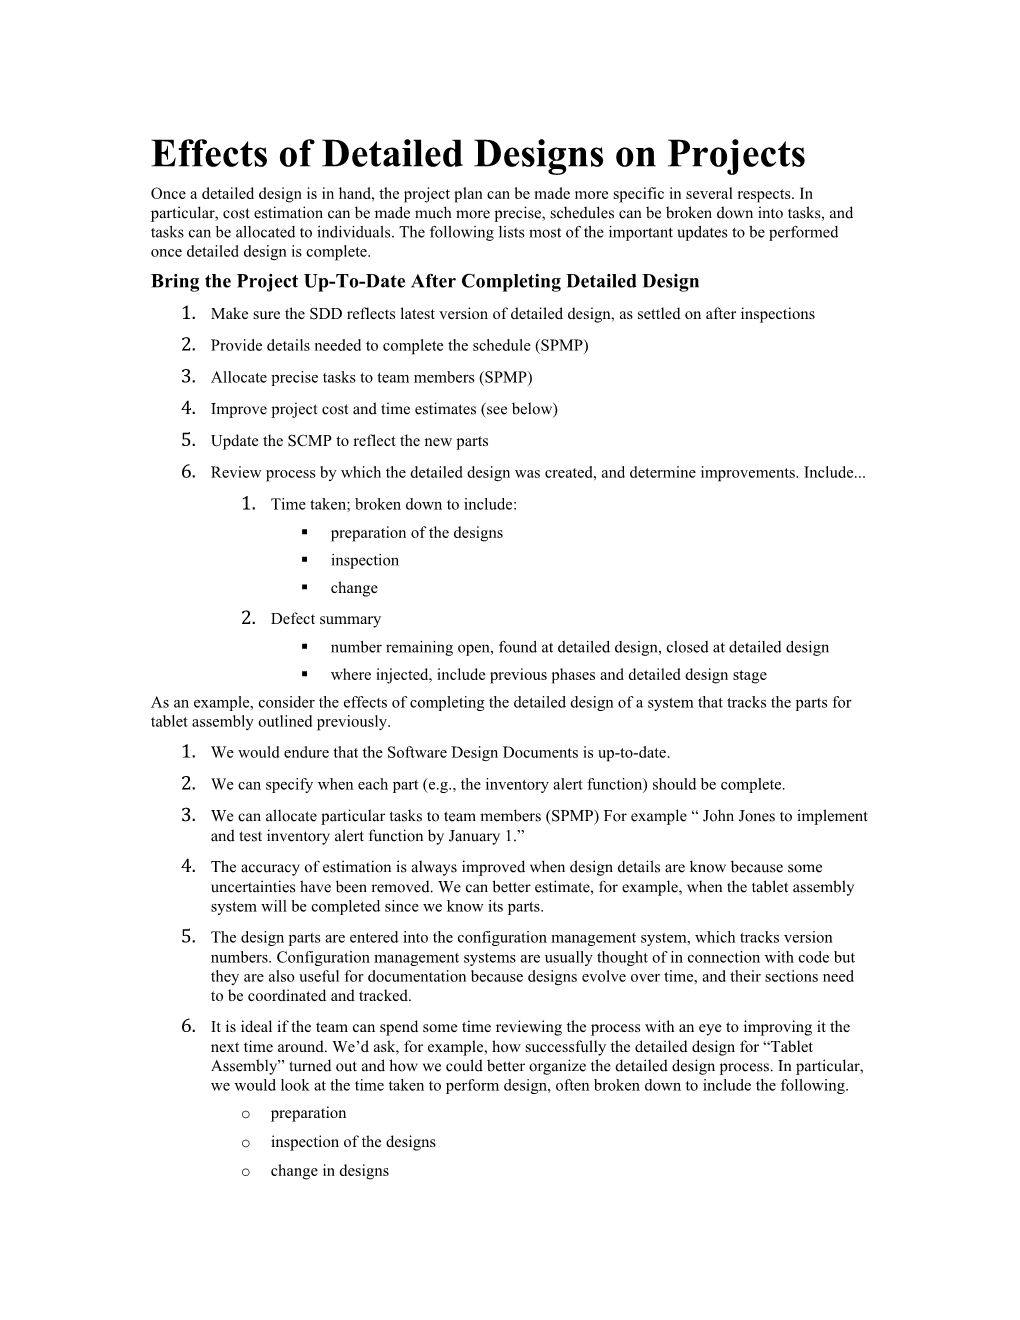 Effects of Detailed Designs on Projects